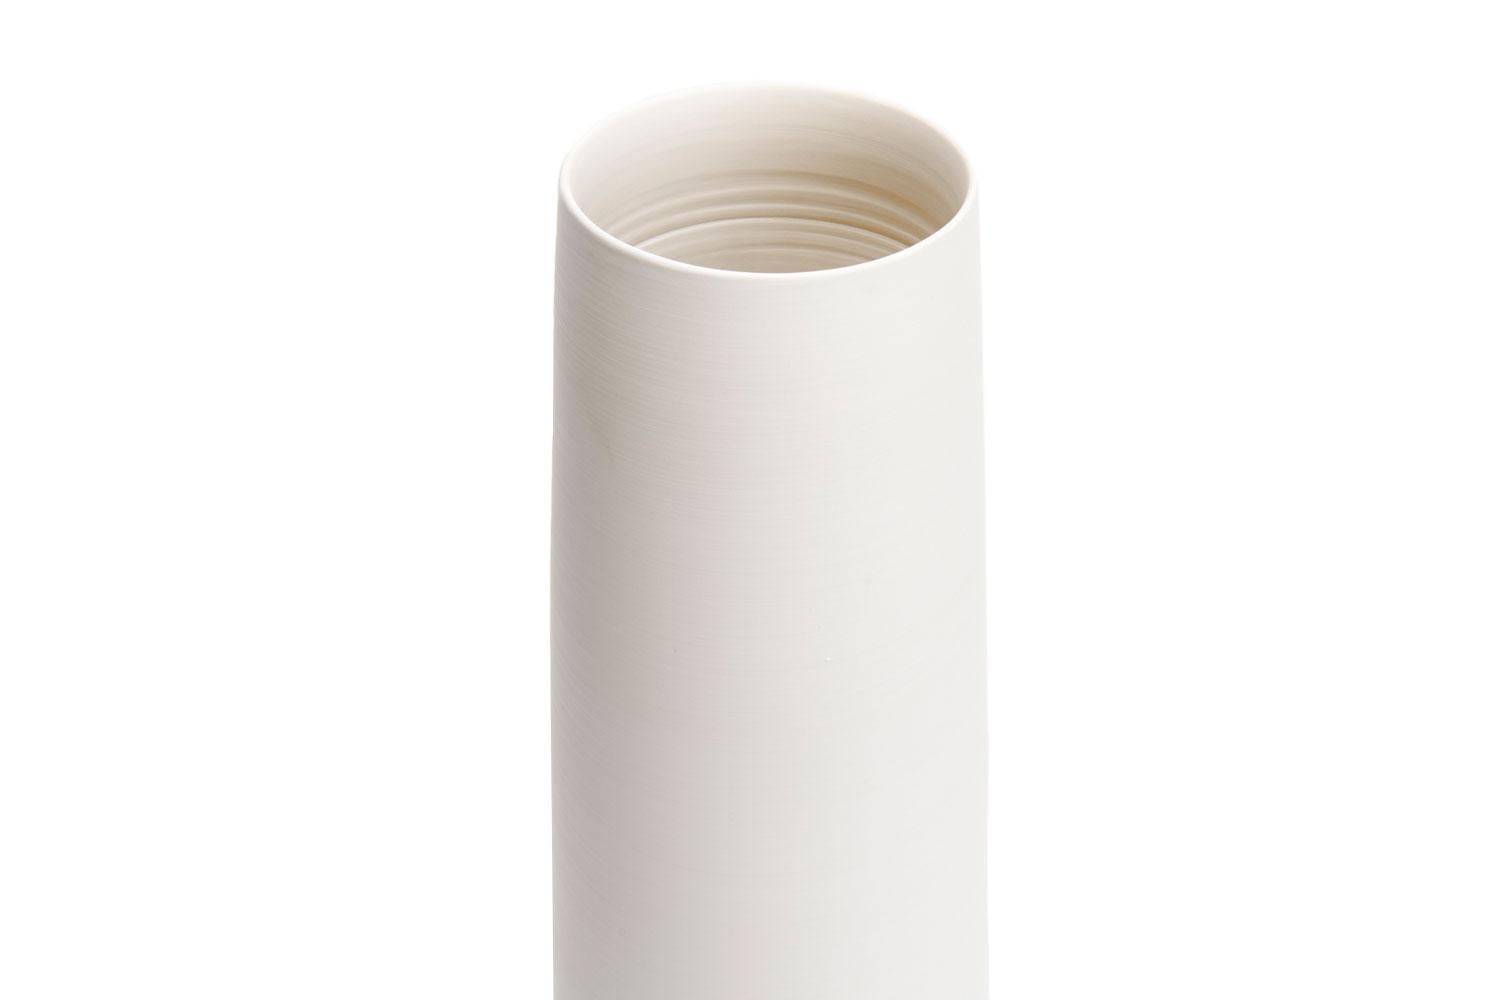 White handmade vase, Rina Menardi

White ceramic vessel is handmade in Italy and from Rina Menardi.

Rina Menardi’s collections are a fusion of art, design and craftsmanship, where chromatism, aesthetics and functionality converge in a synthesis